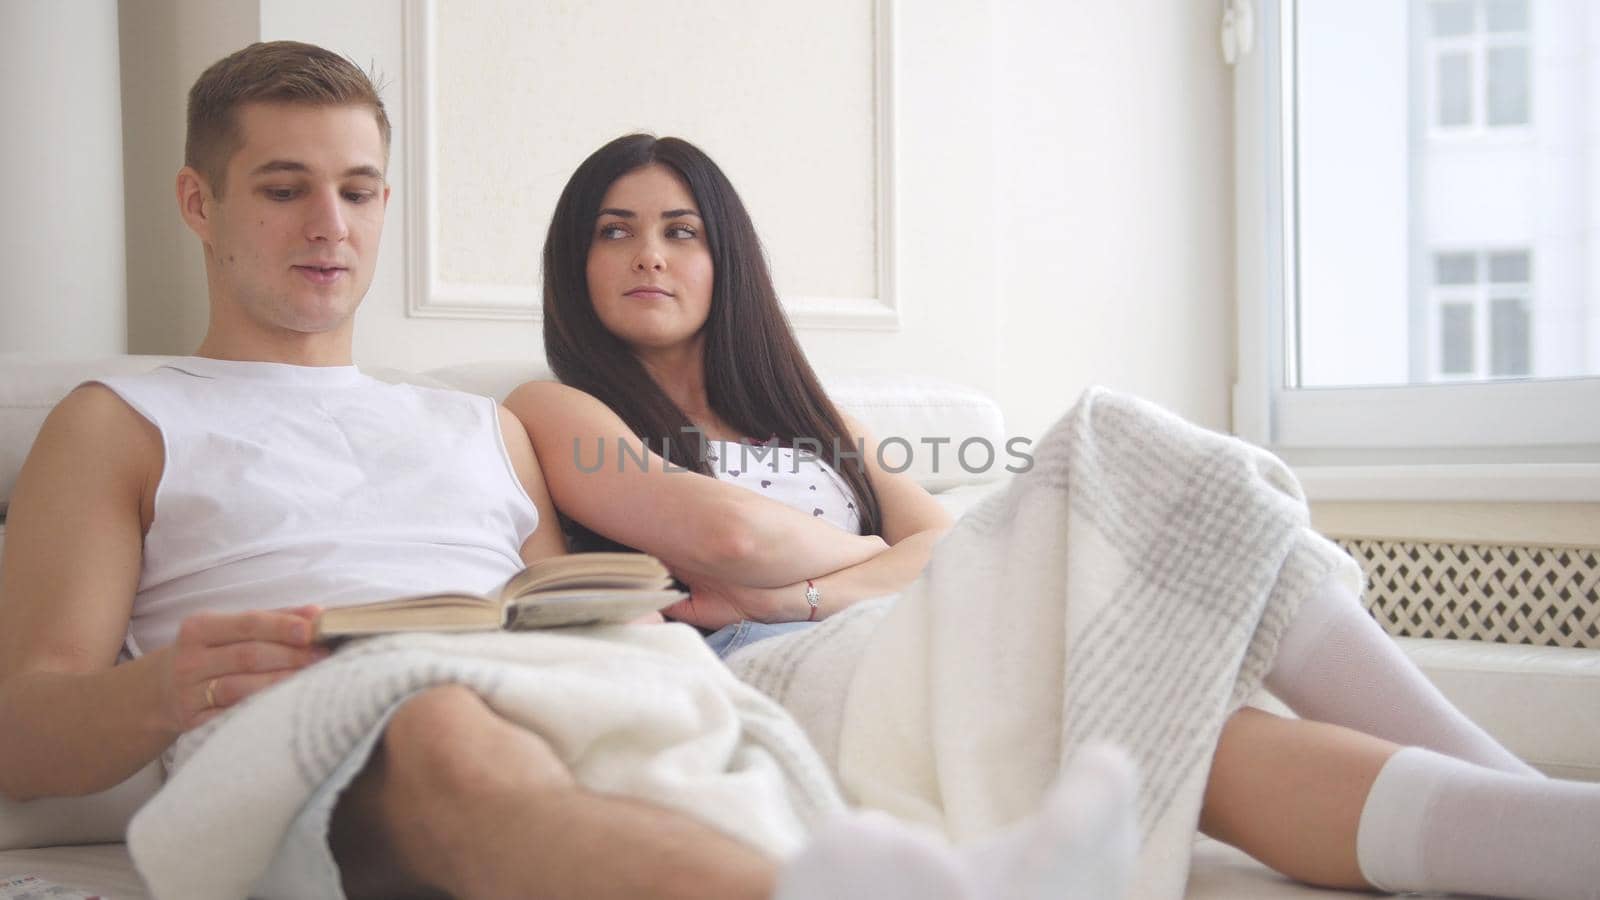 Happy young attractive couple sitting together on the couch talking, laughing and reading a book, people's attitudes